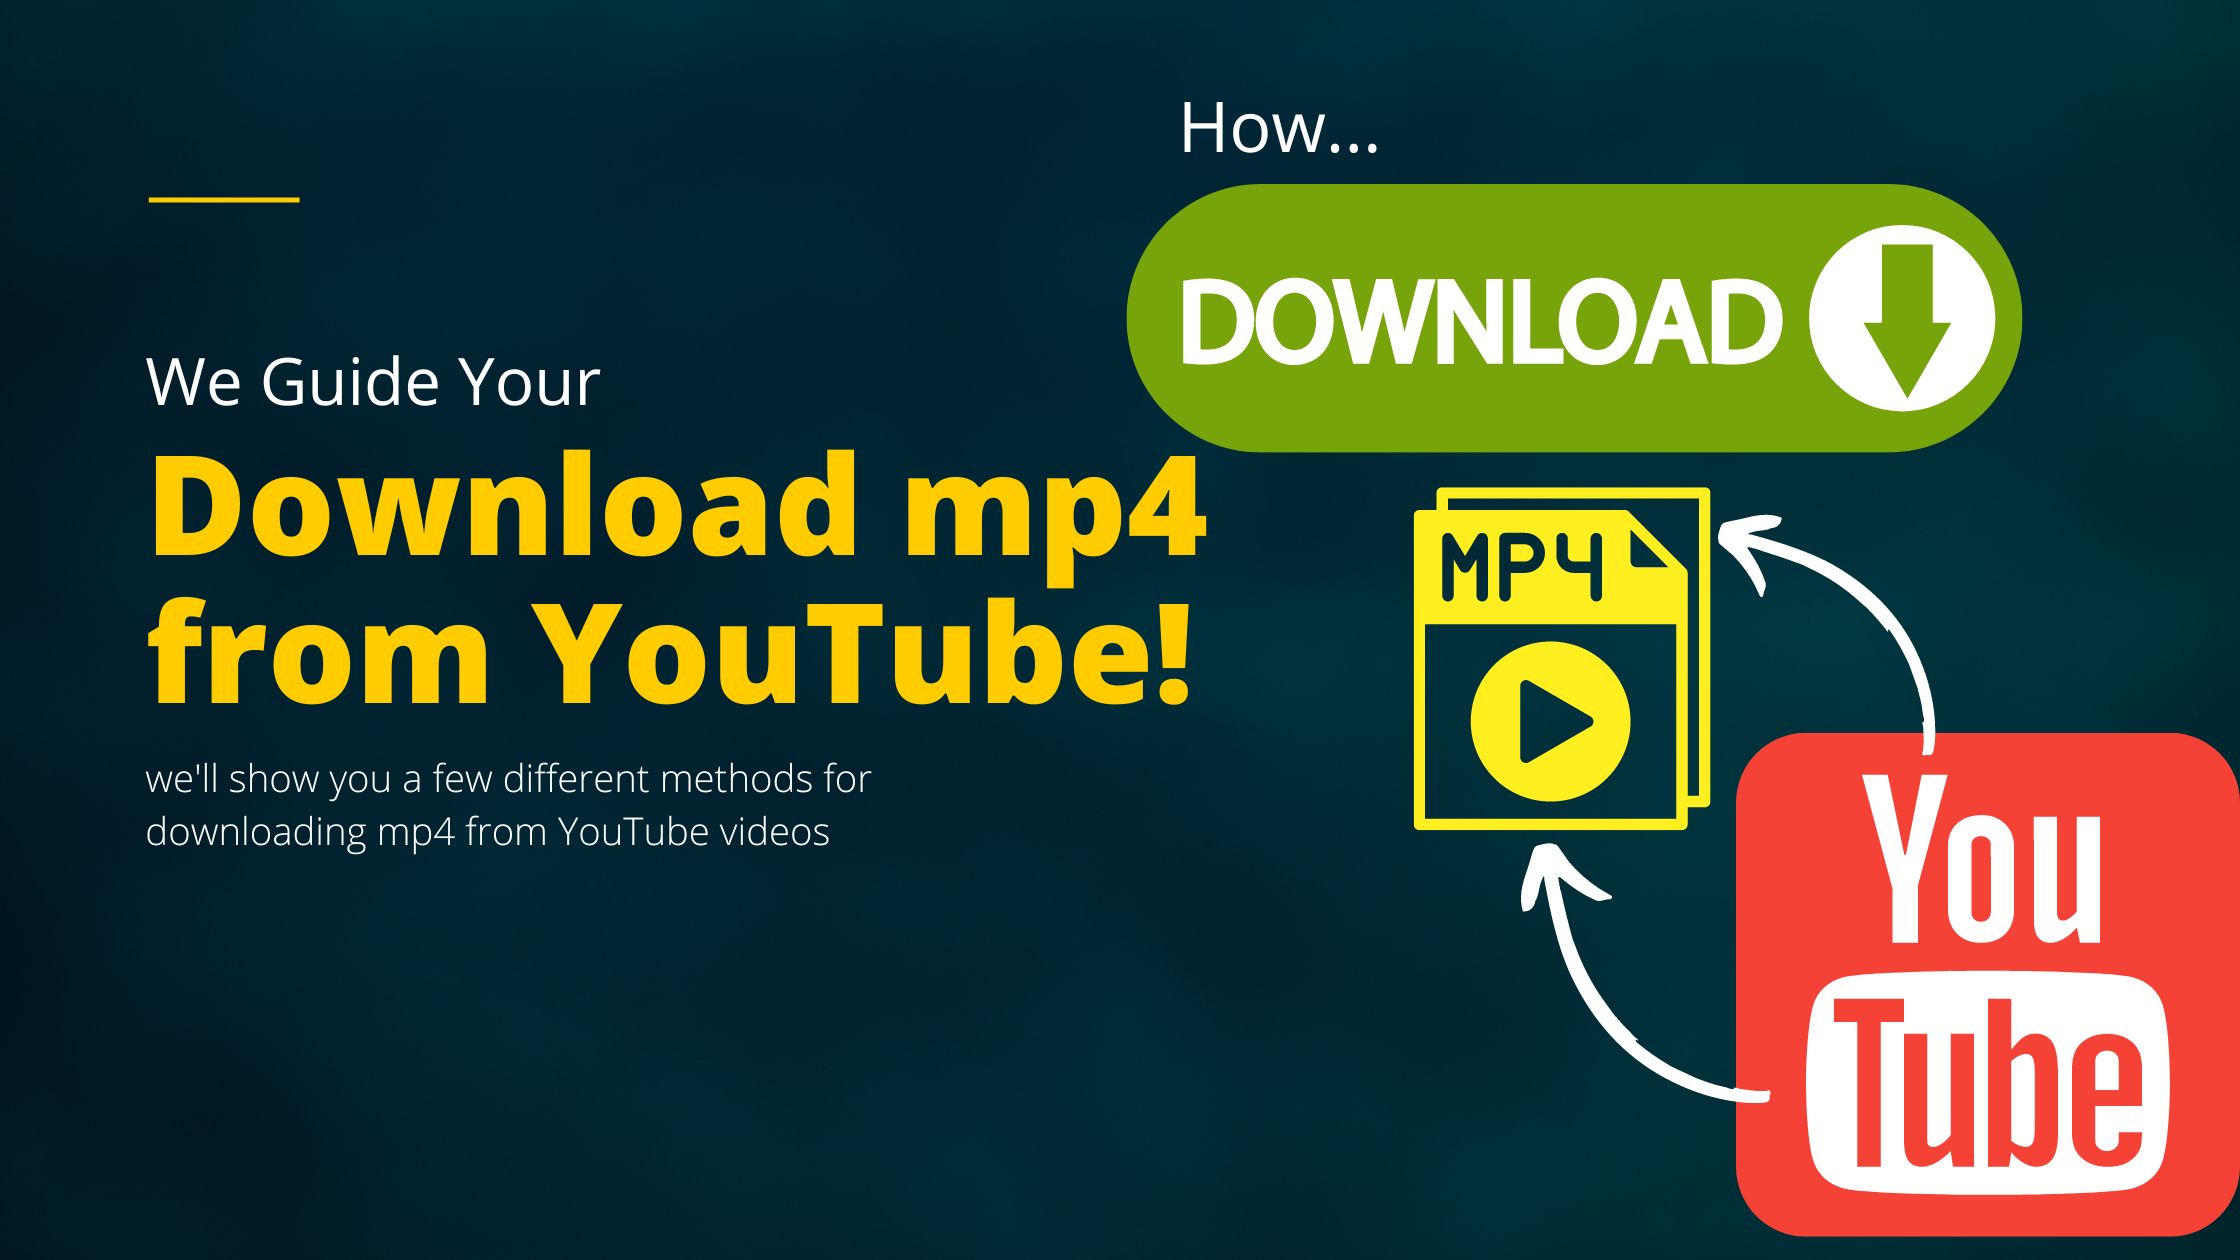 How to Download mp4 from YouTube….